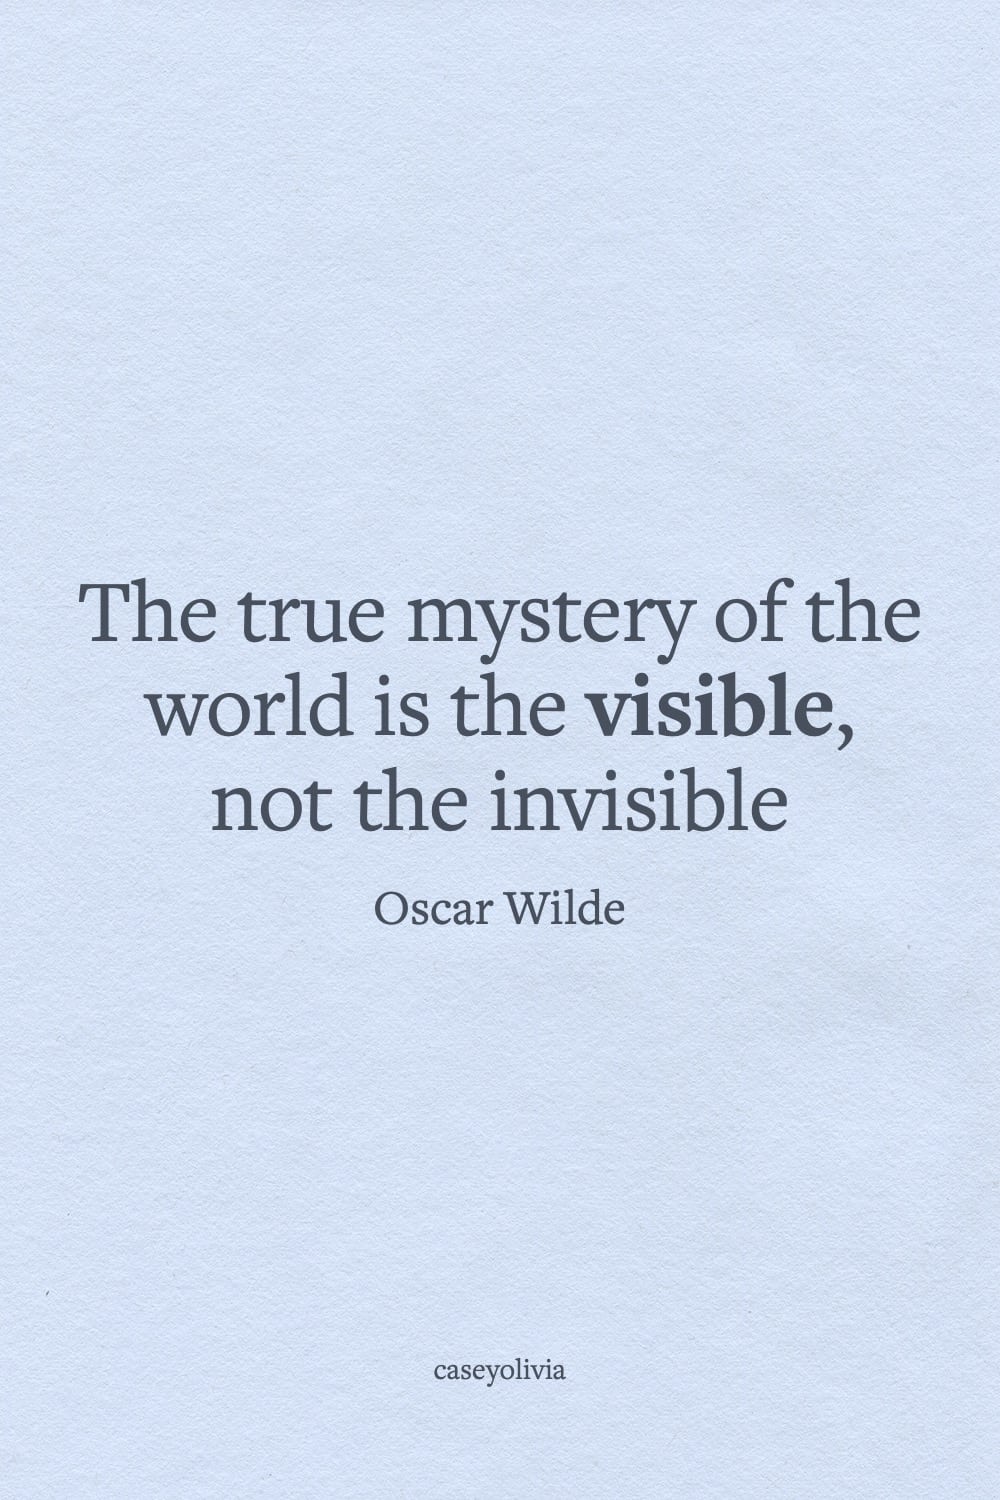 oscar wilde true mystery of the world quote